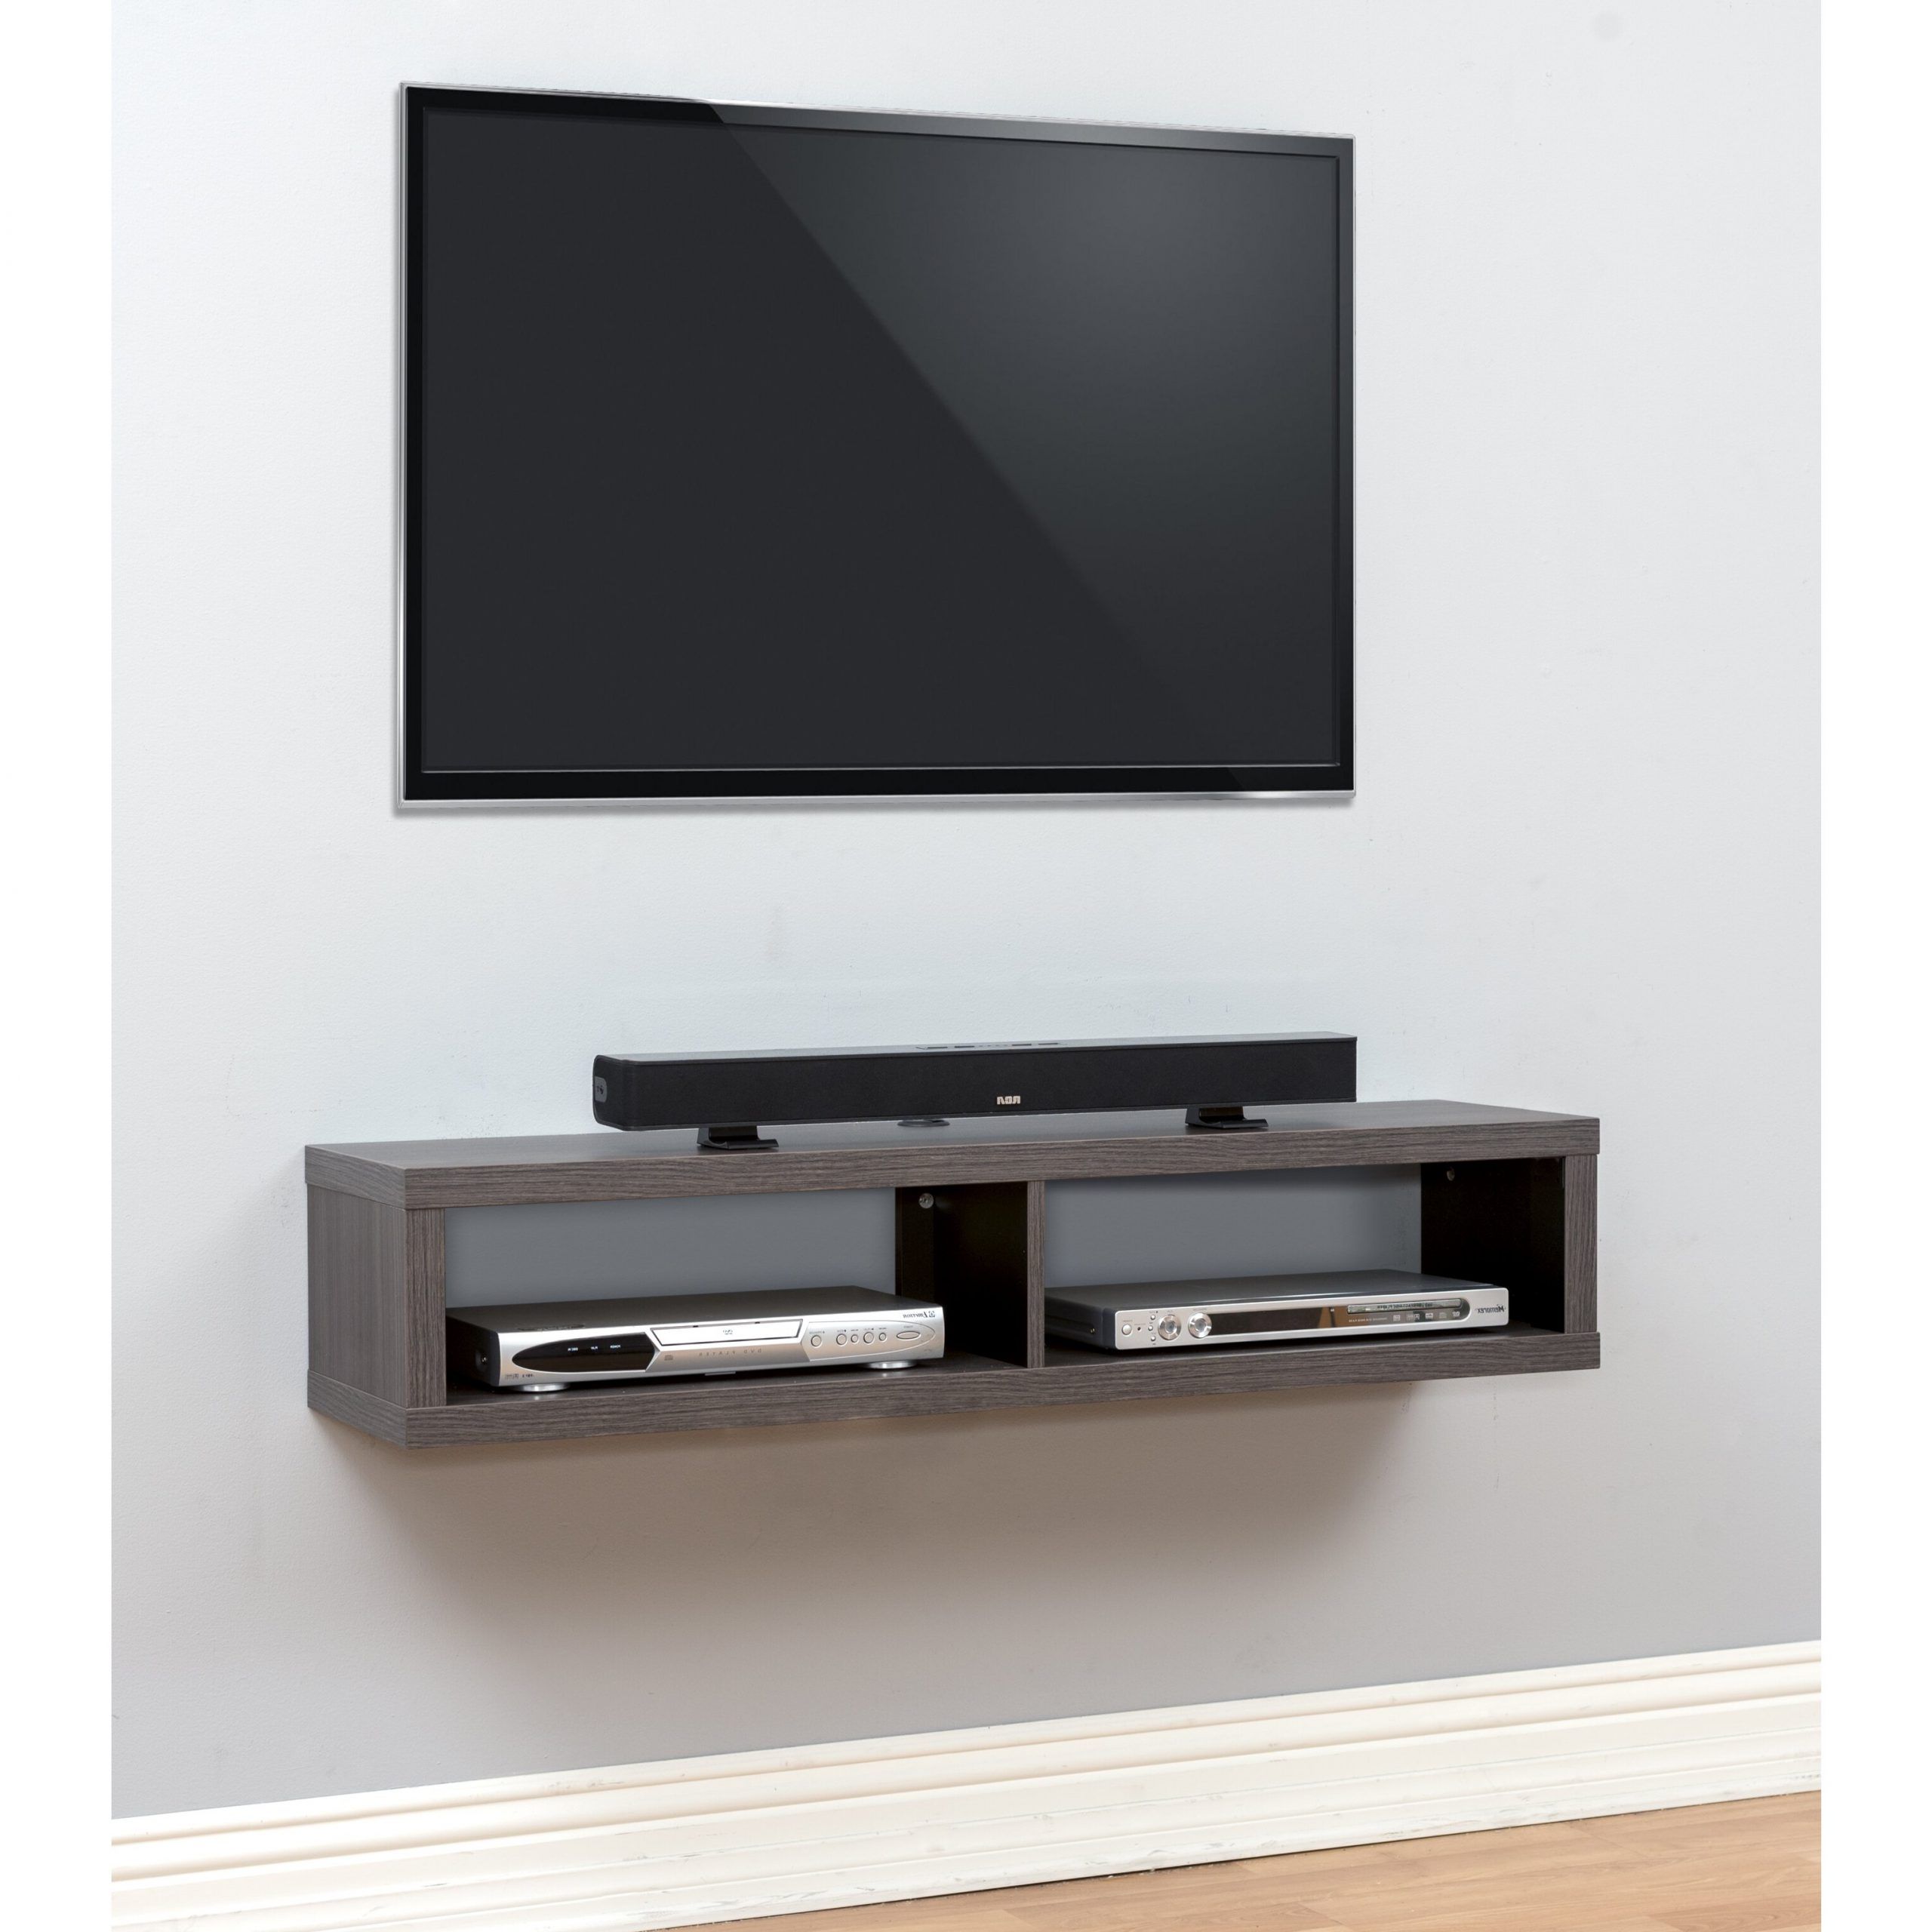 Martin Home Furnishings 48" Shallow Wall Mounted Tv With Regard To Floating Tv Shelf Wall Mounted Storage Shelf Modern Tv Stands (View 11 of 20)